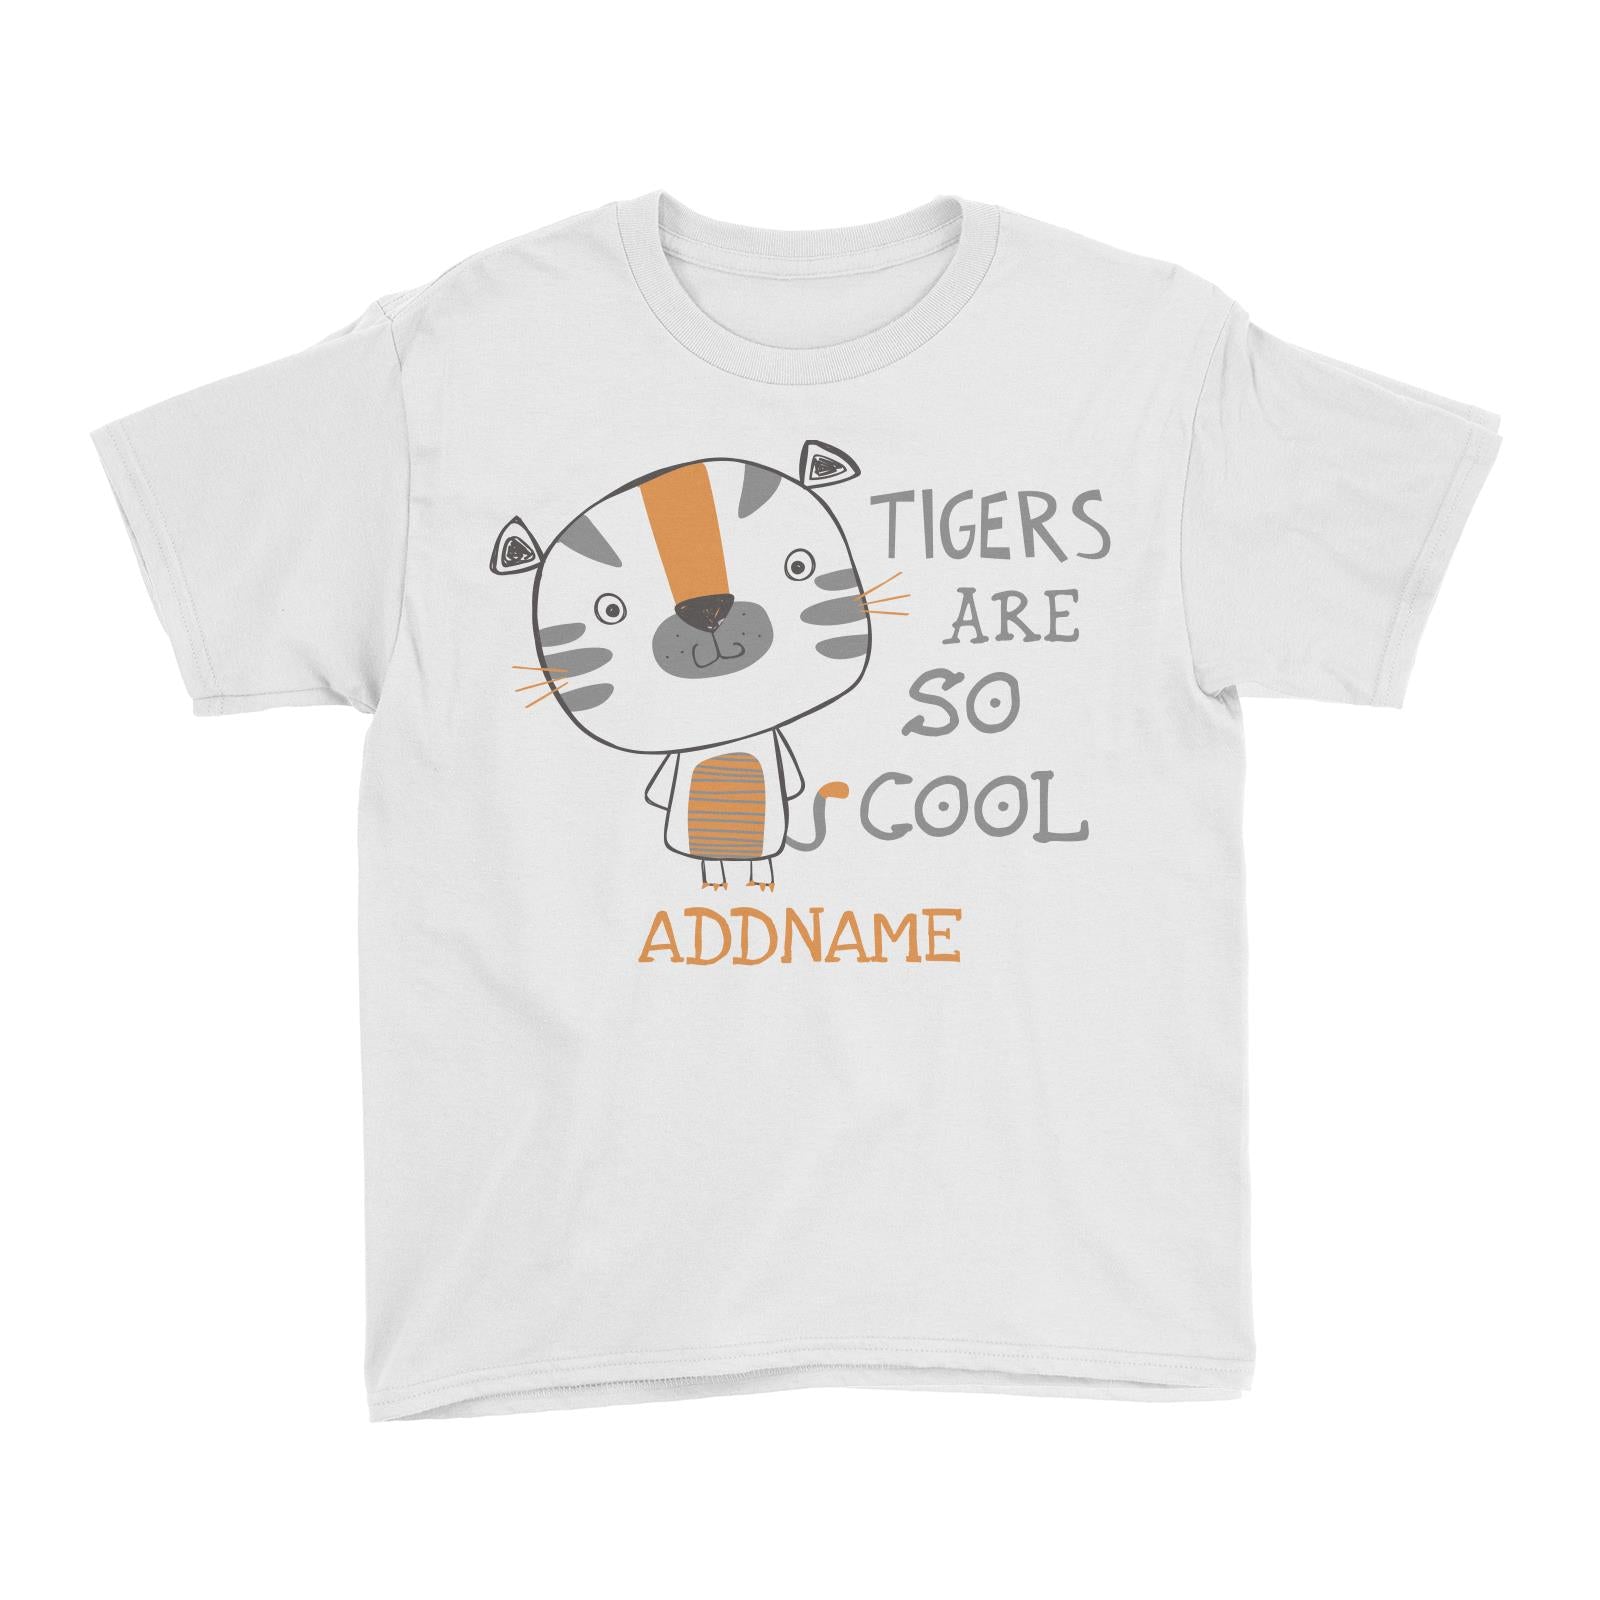 Tigers Are So Cool Addname White Kid's T-Shirt